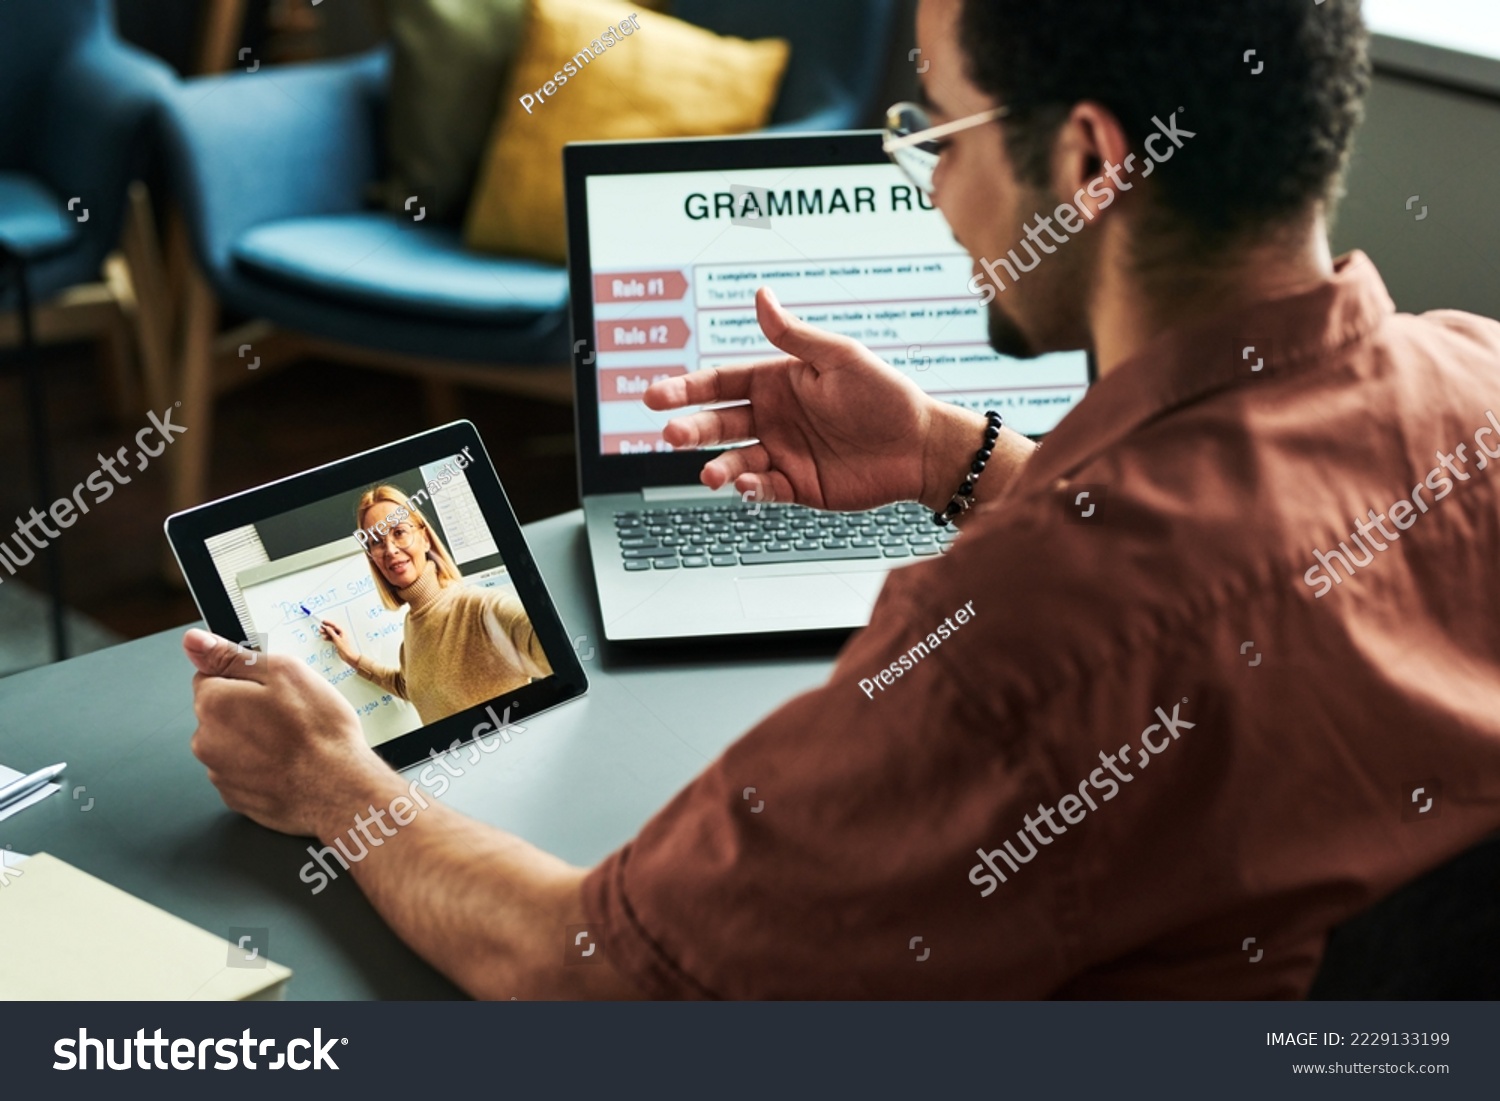 Young student communicating with teacher on tablet screen making presentation of new English grammar subject during online lesson #2229133199